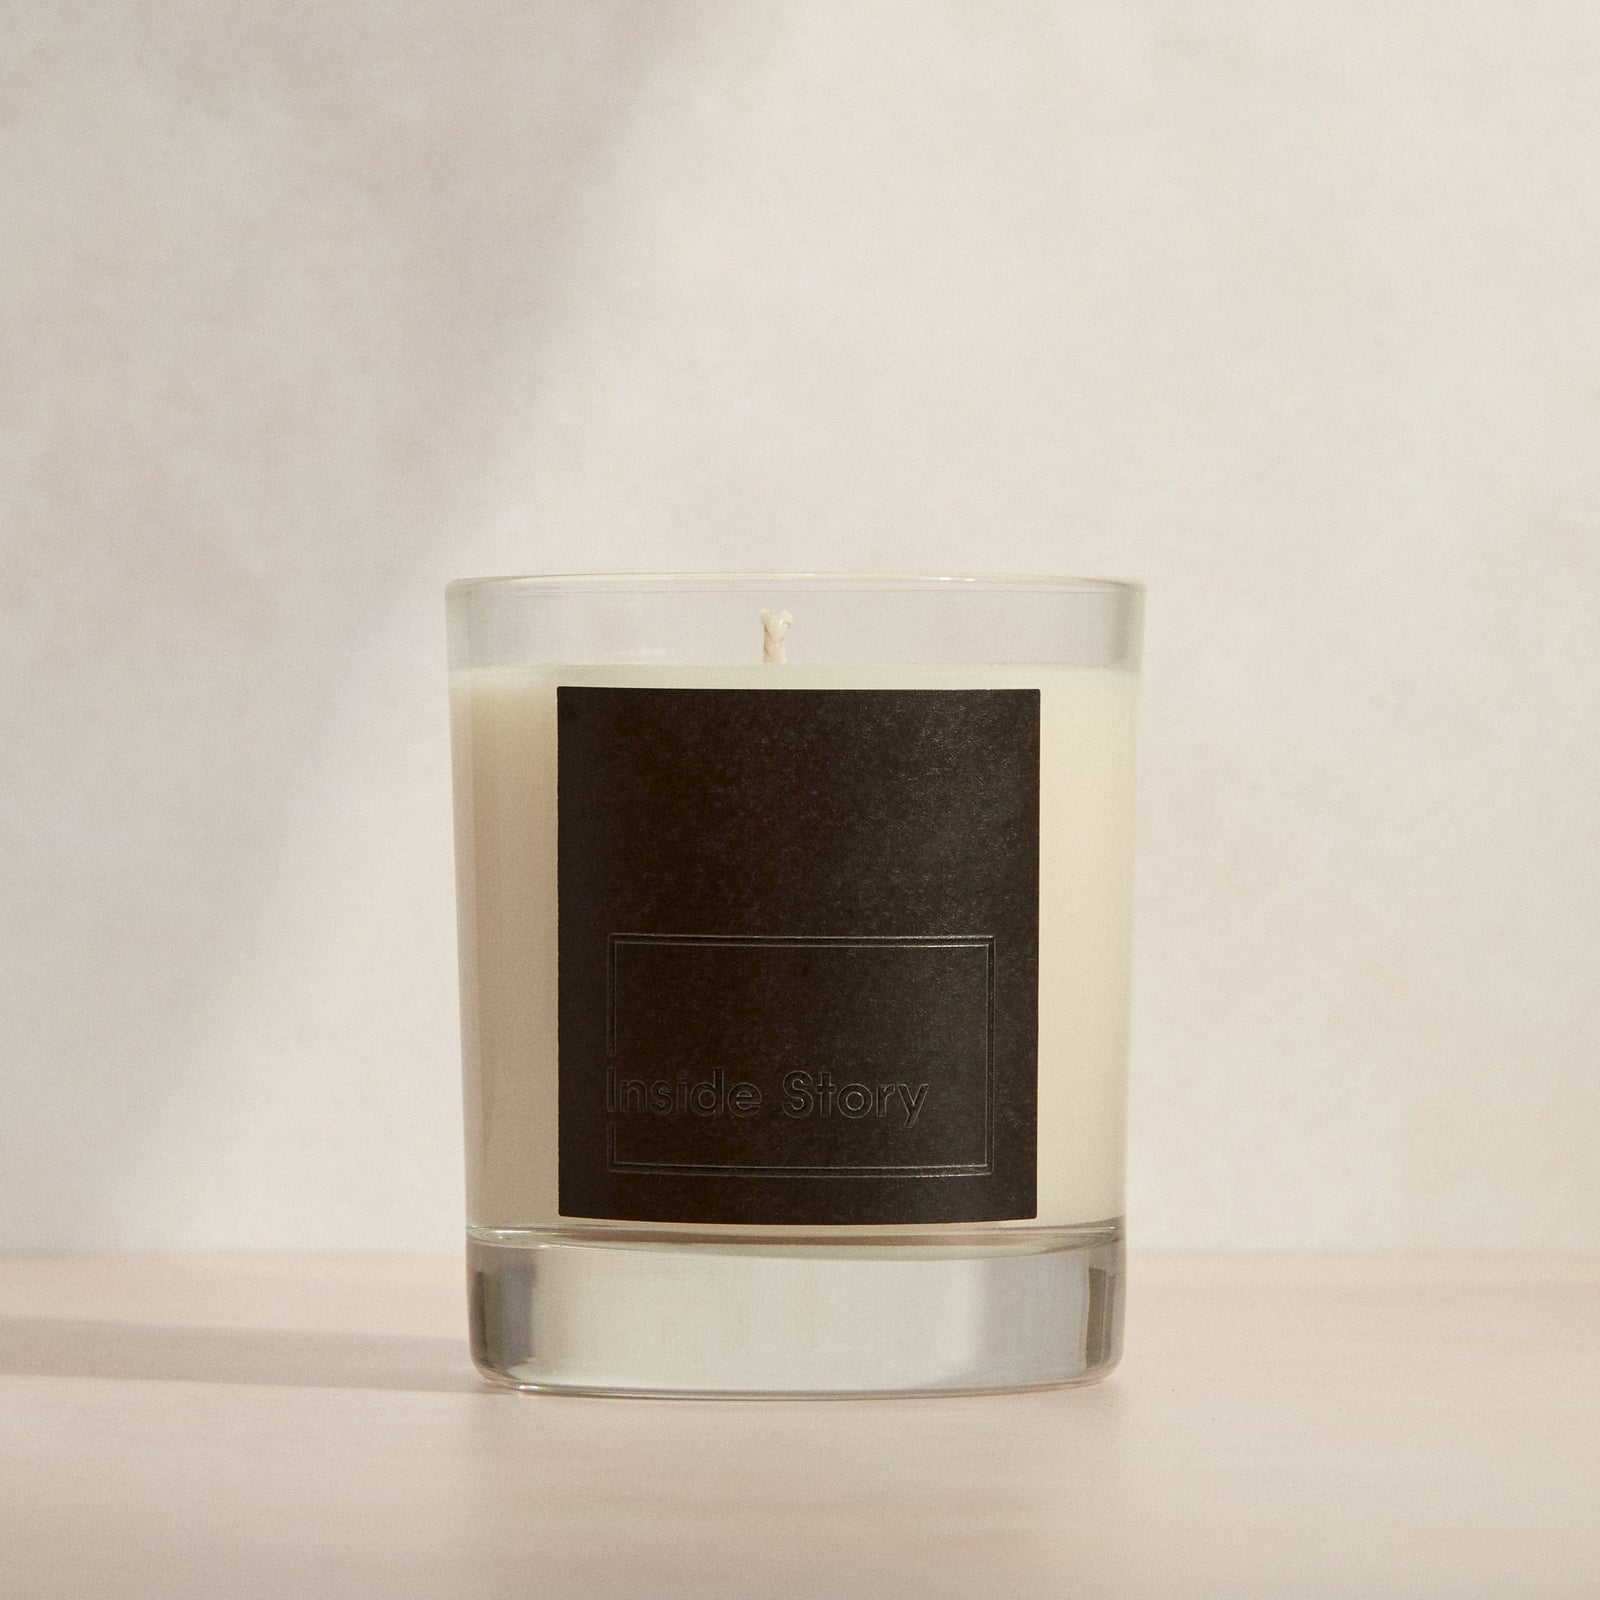 Inside Story Black Pomegranate Signature Filled Candle 300g